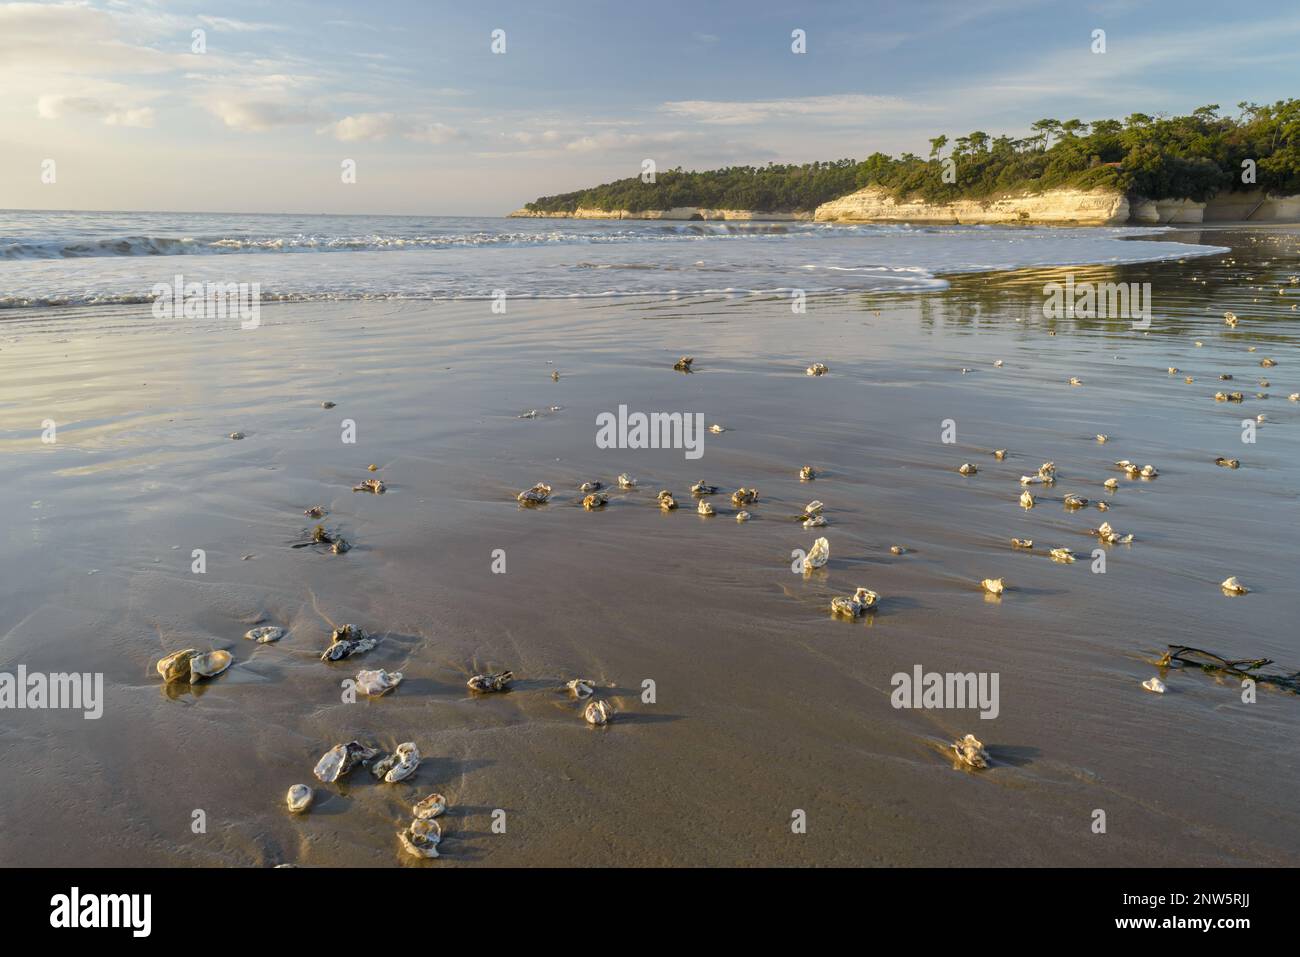 Beach at low tide with oyster shells washed ashore on west Atlantic coast France near Royan, Charente-Maritime, France Stock Photo